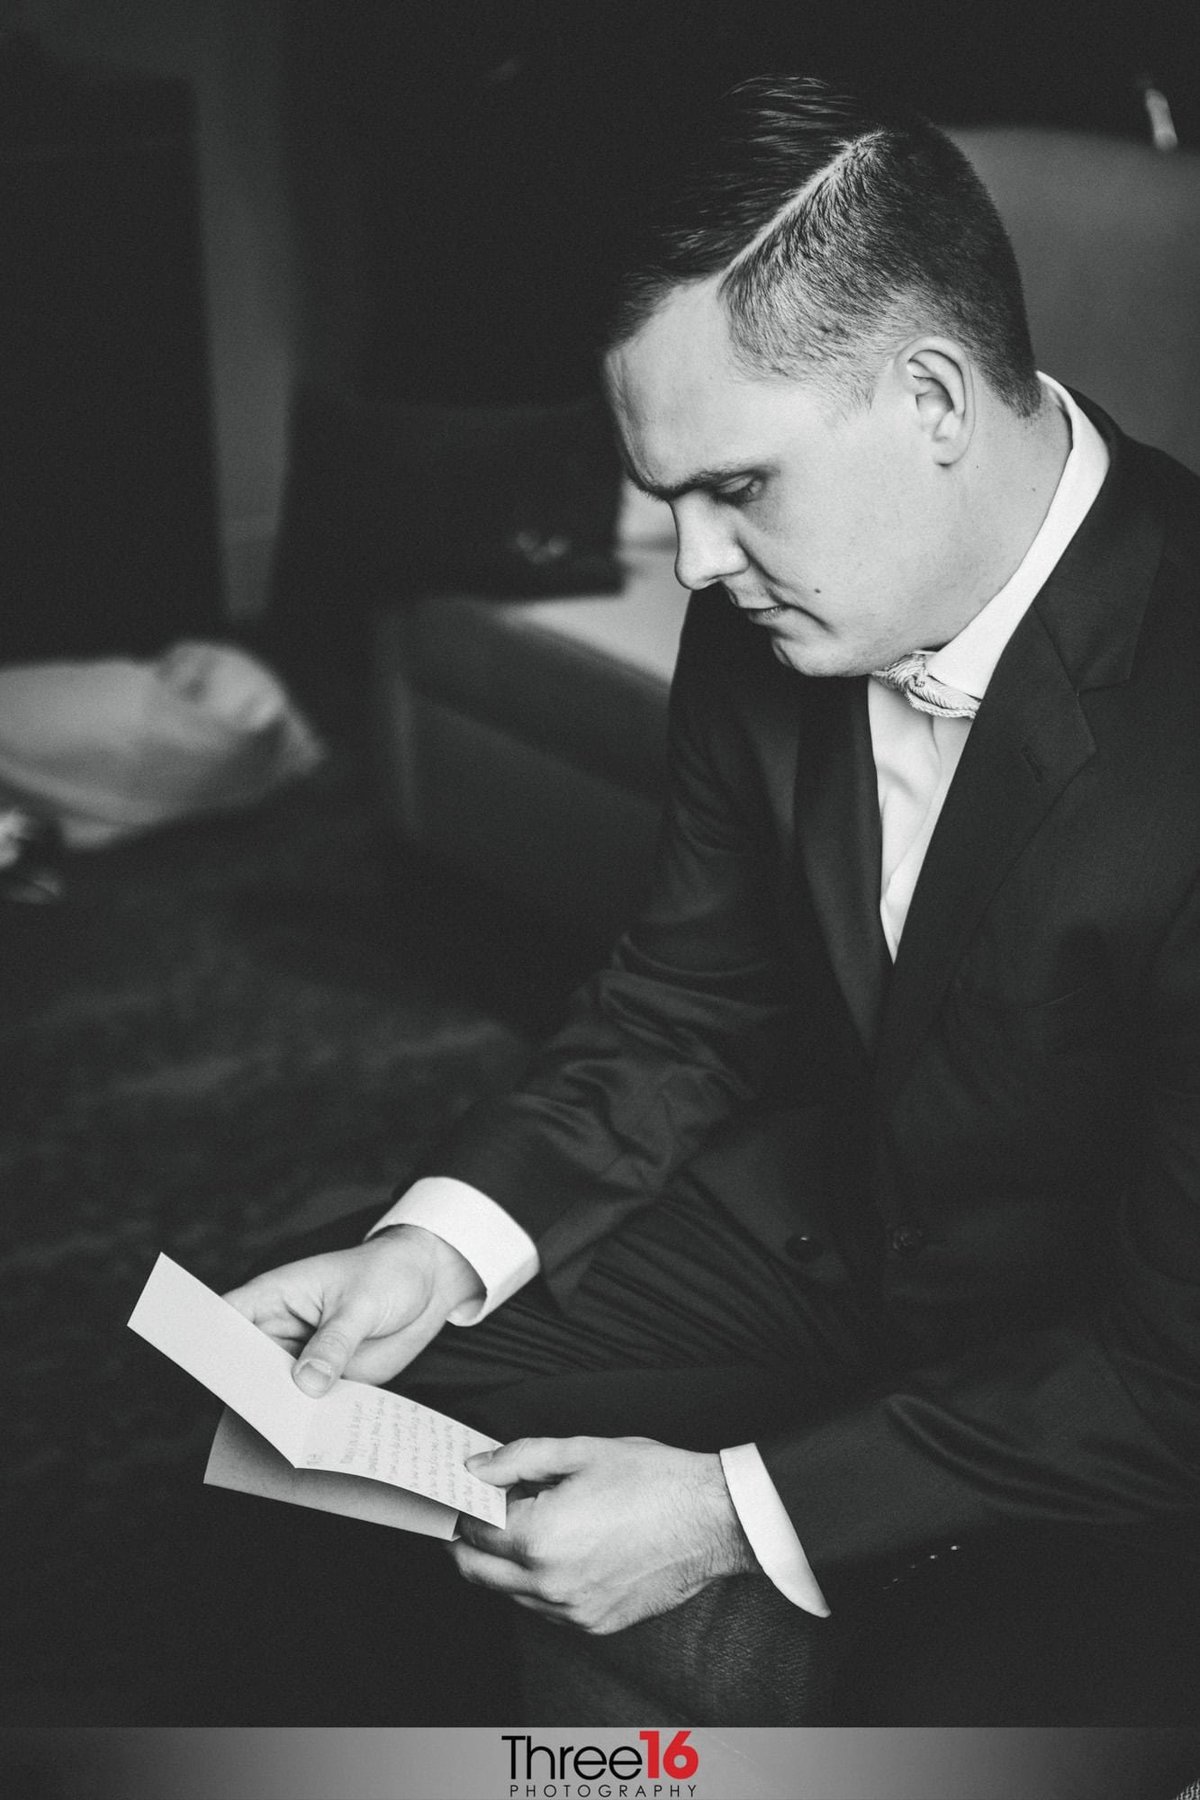 Groom reads a note he received from his Bride